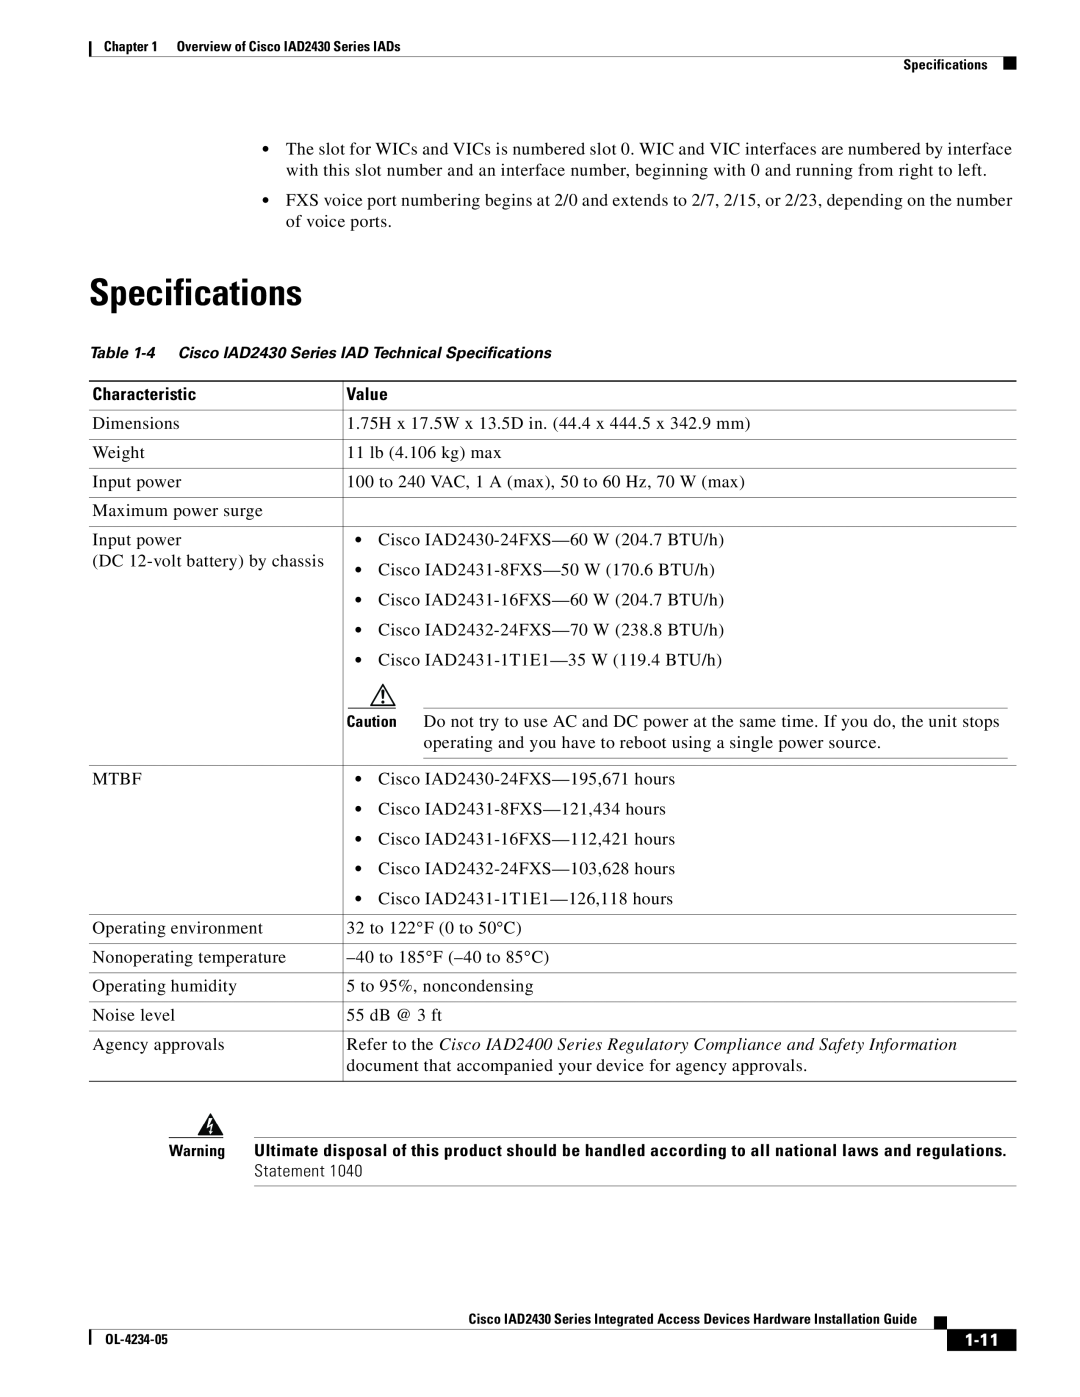 Cisco Systems IAD2430 Series specifications Specifications, Characteristic, Value, 1-11 